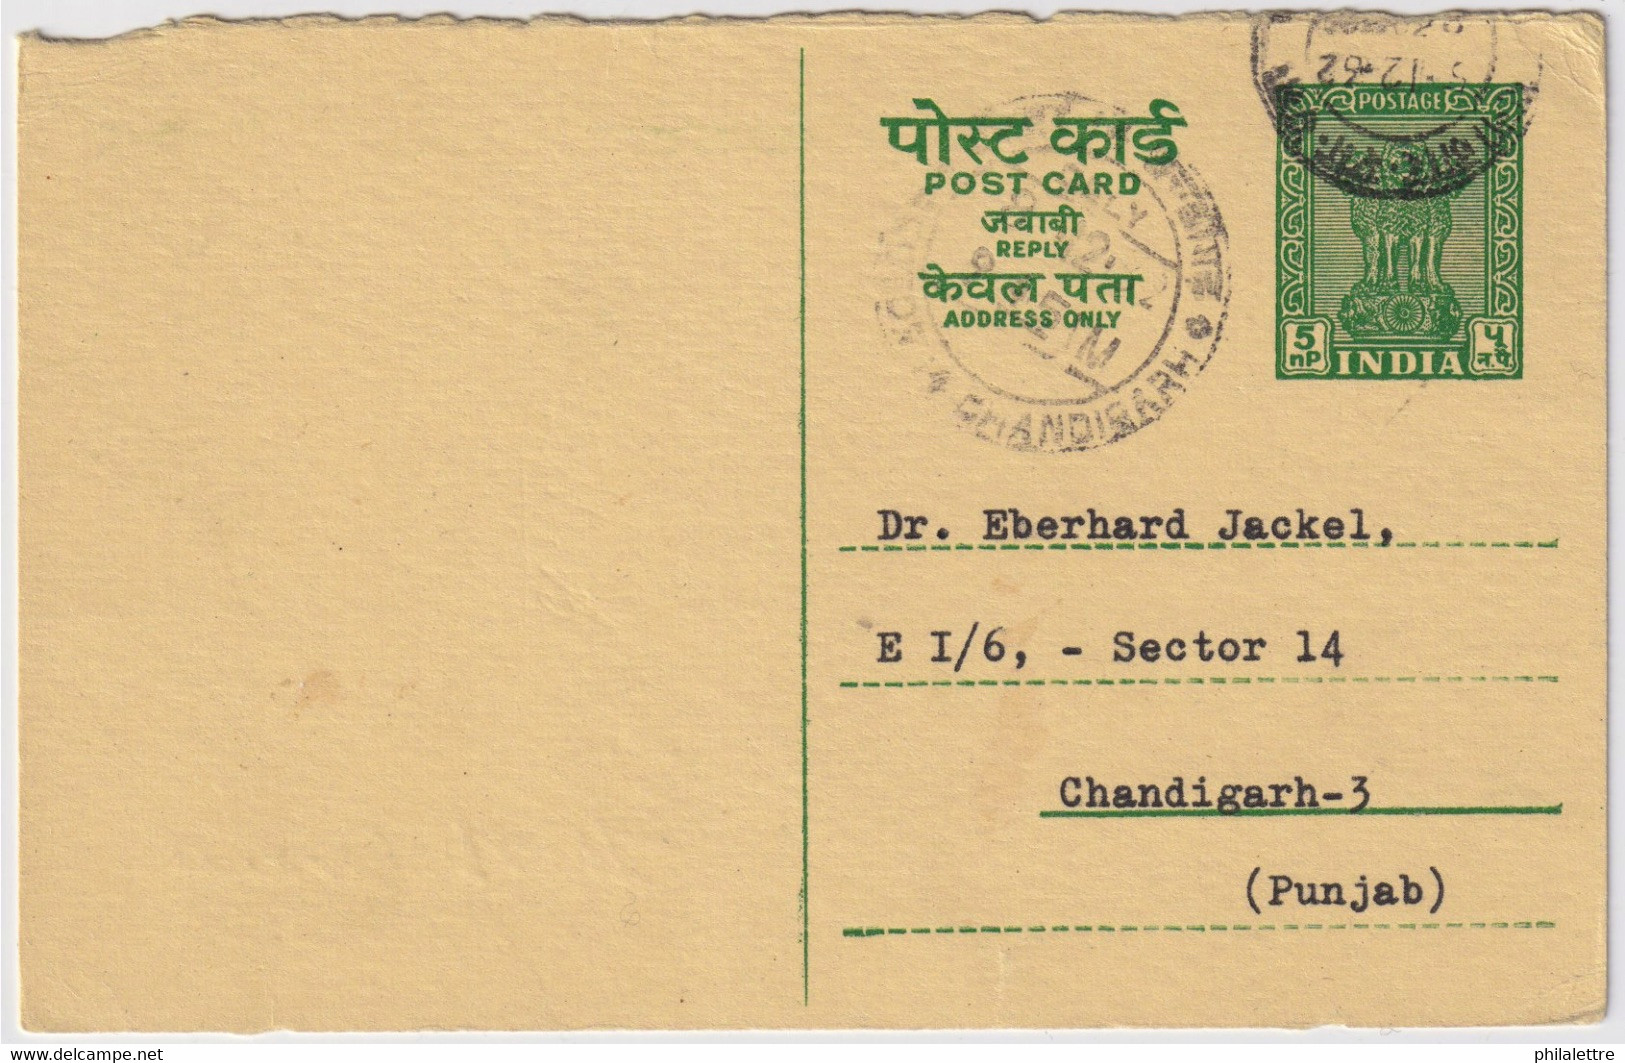 INDE / INDIA - 1962 - Fine Postal Card Used Locally In CHANDIGARH - Postcards